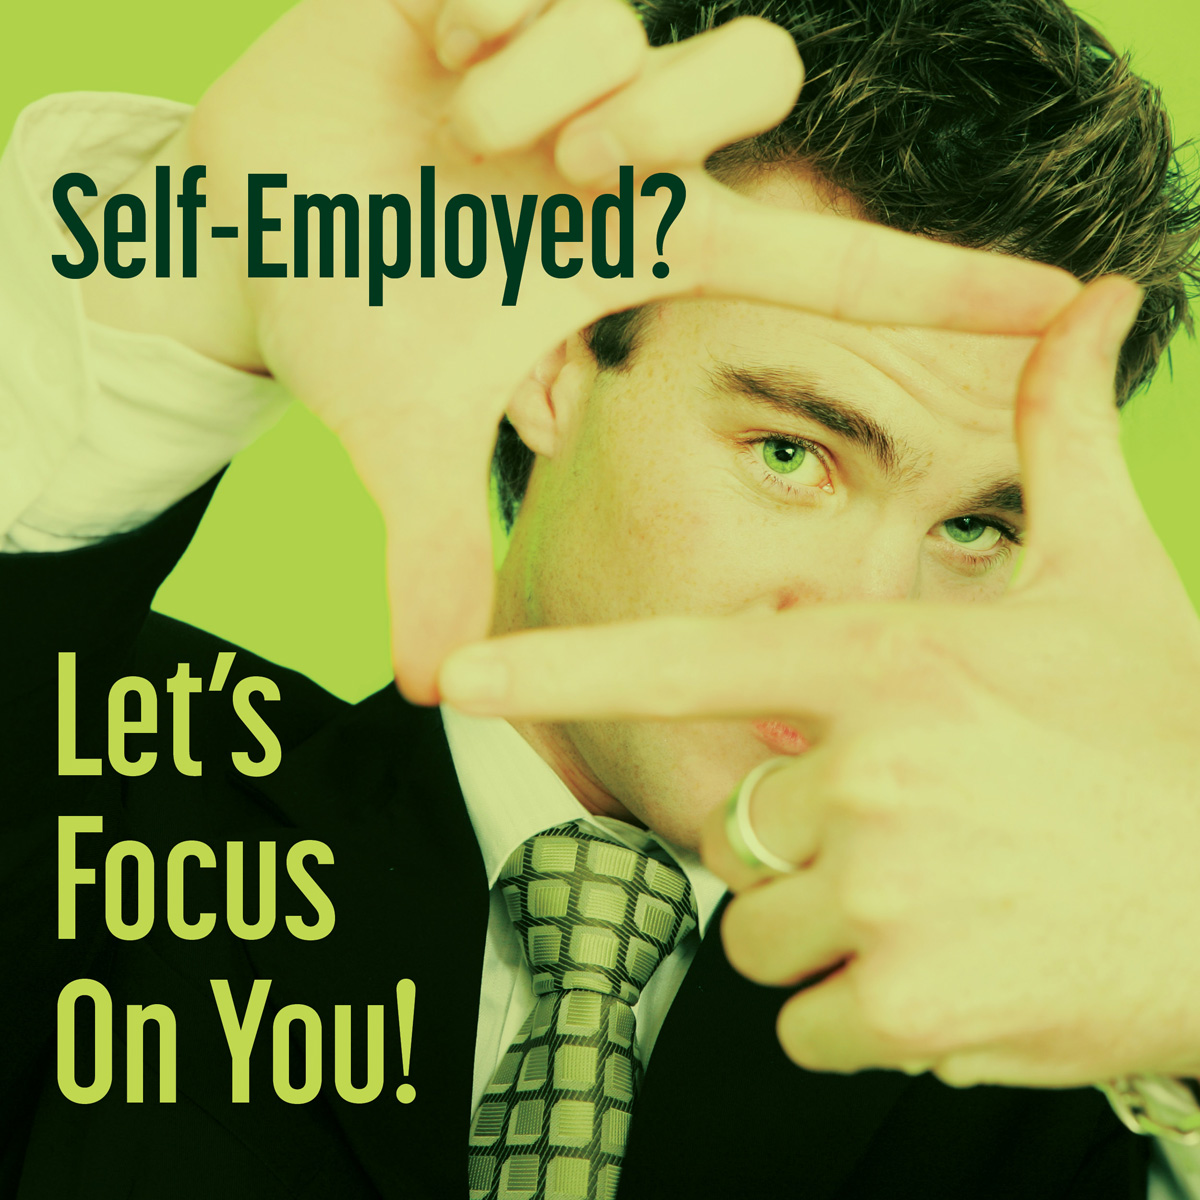 Being self-employed can be overwhelming. Let's make the loan process stress-free together. Your success is my priority! #selfemployed #loanapplication #support